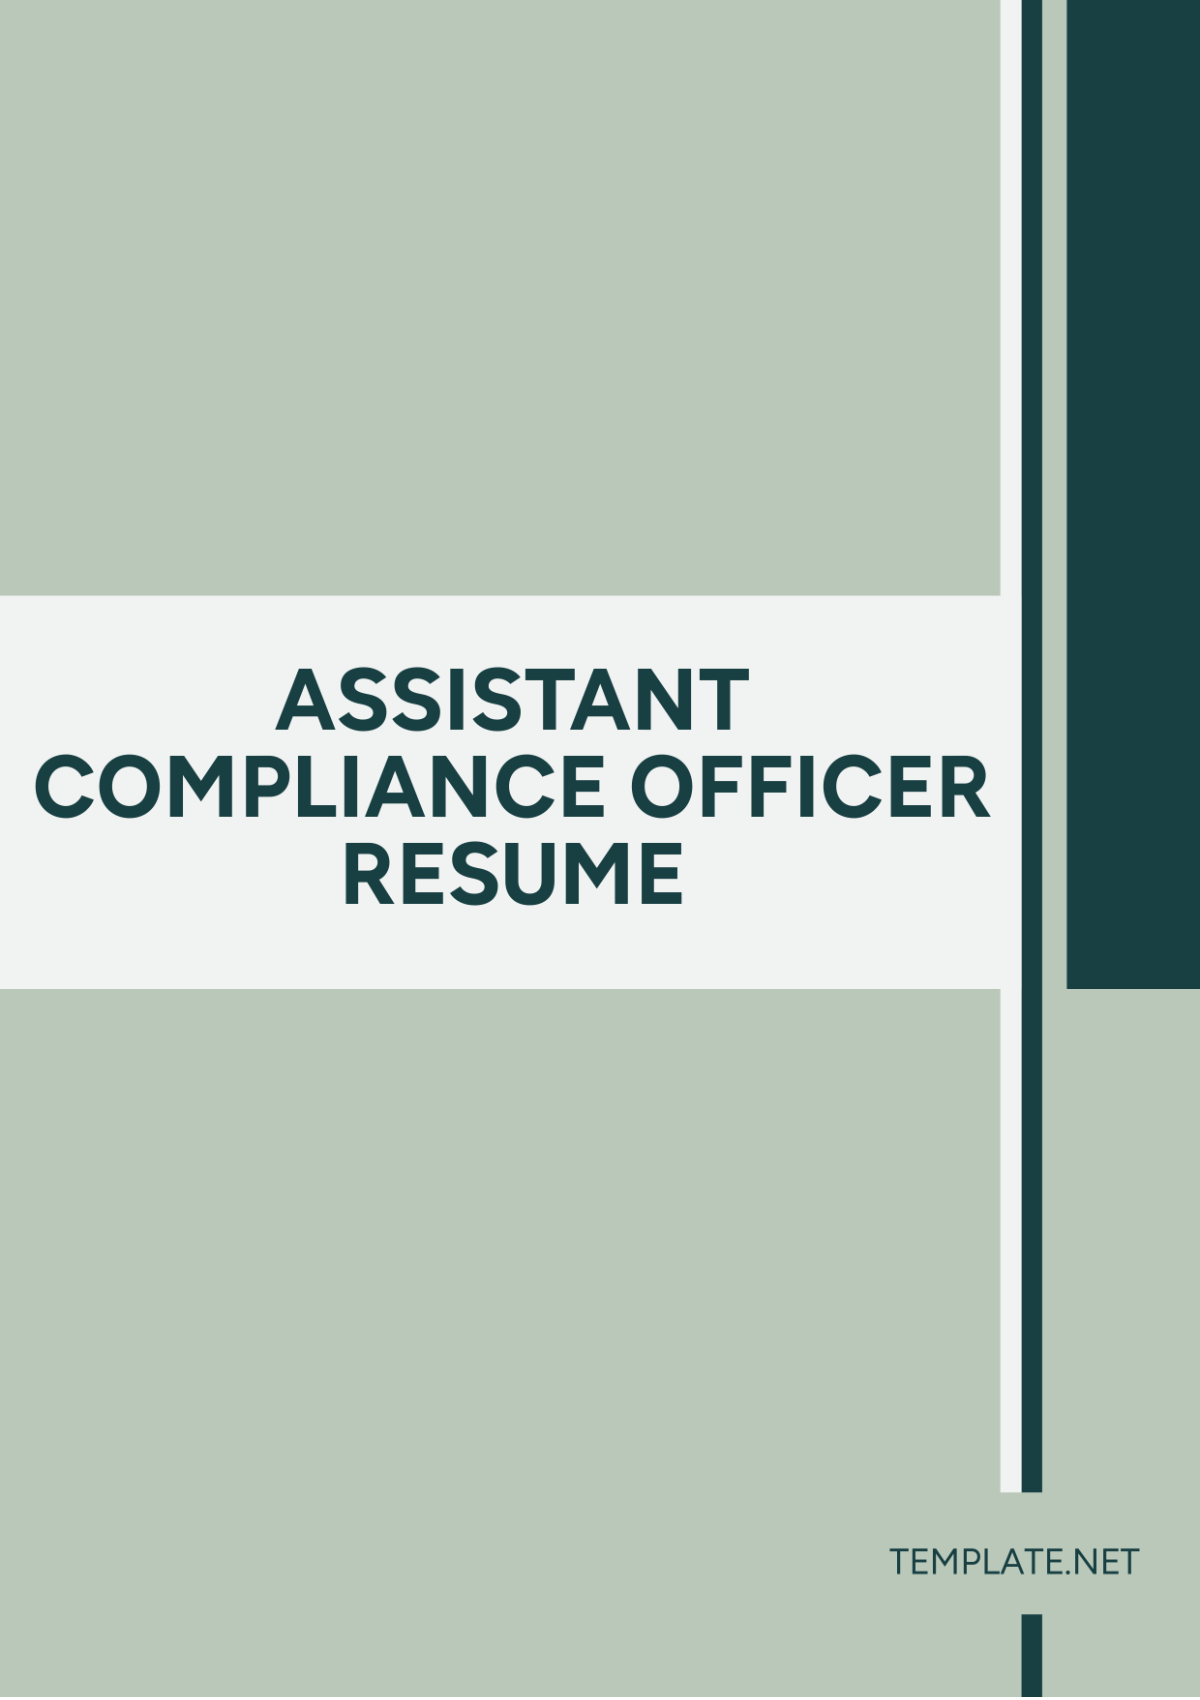 Assistant Compliance Officer Resume Template